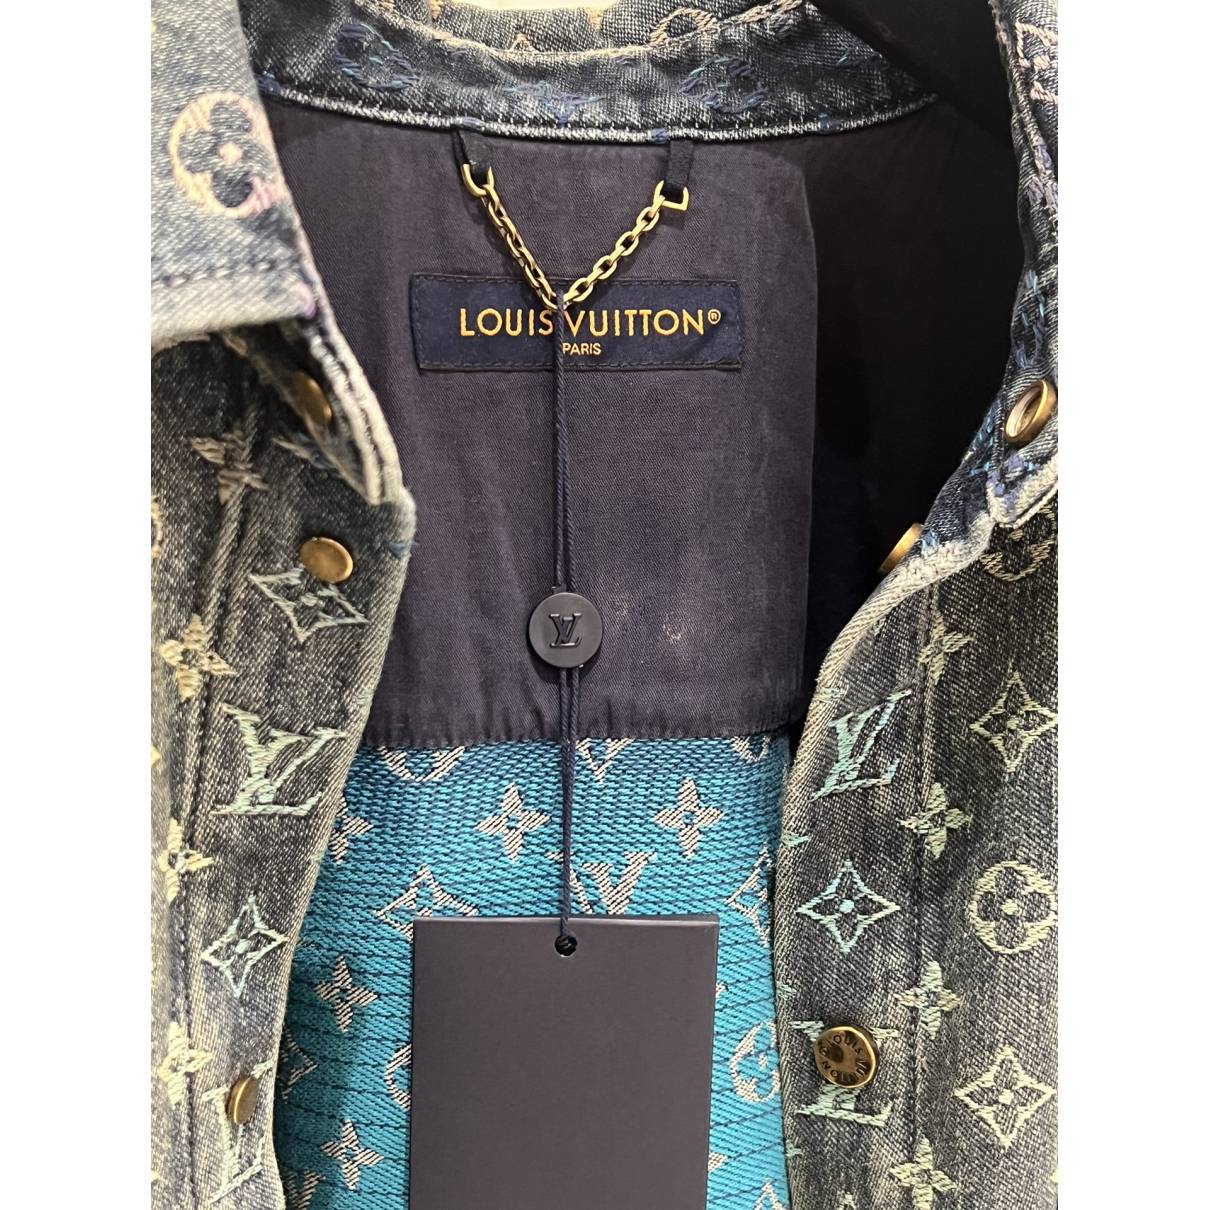 Louis Vuitton - Authenticated Jacket - Denim - Jeans Blue For Man, Never Worn, with Tag